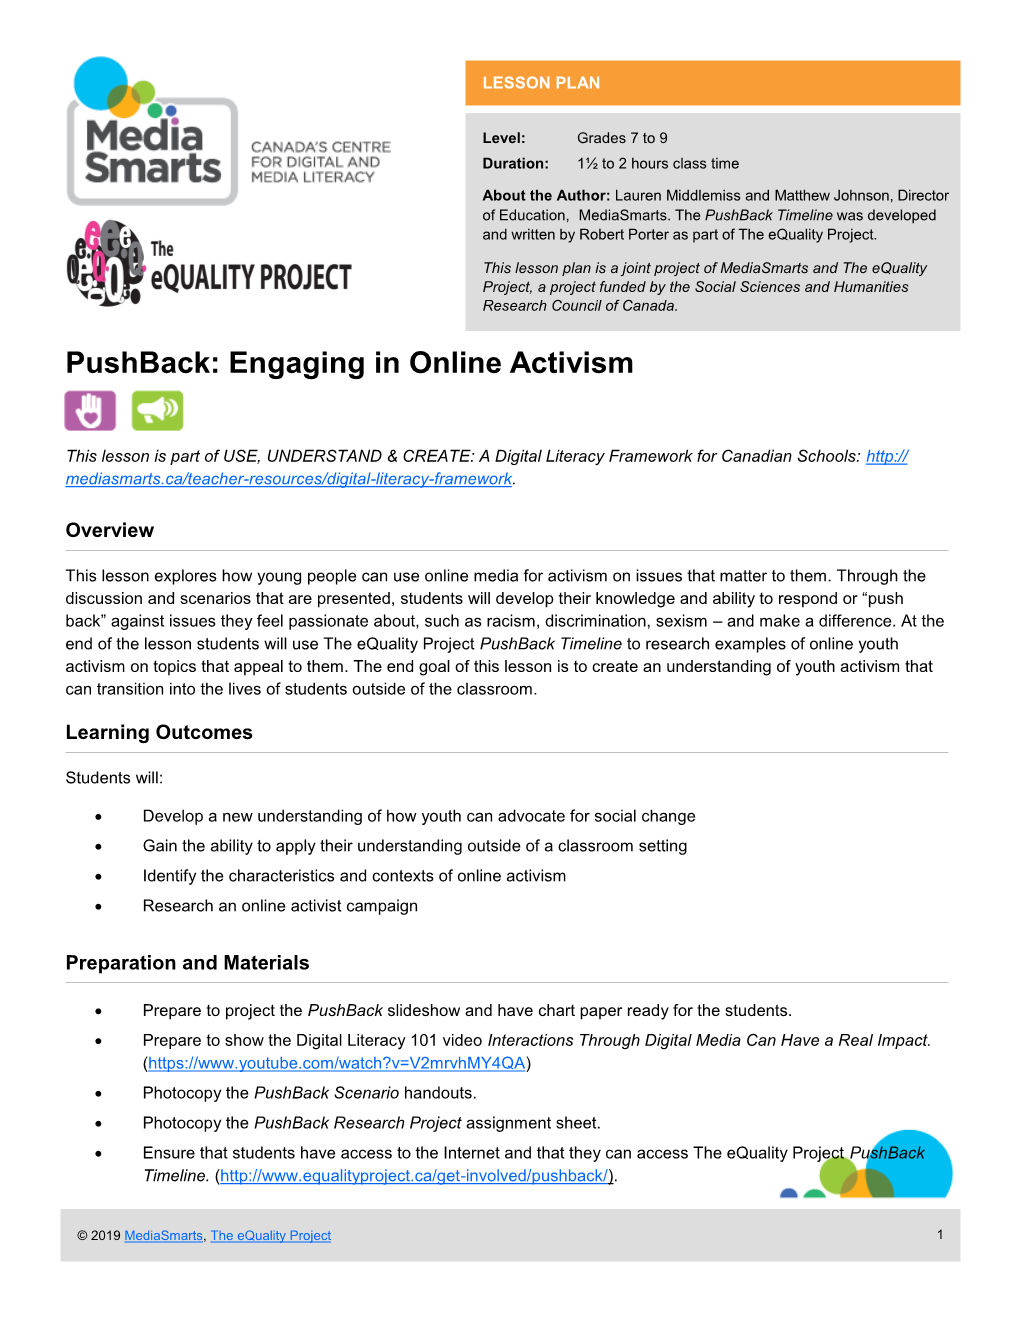 Pushback: Engaging in Online Activism